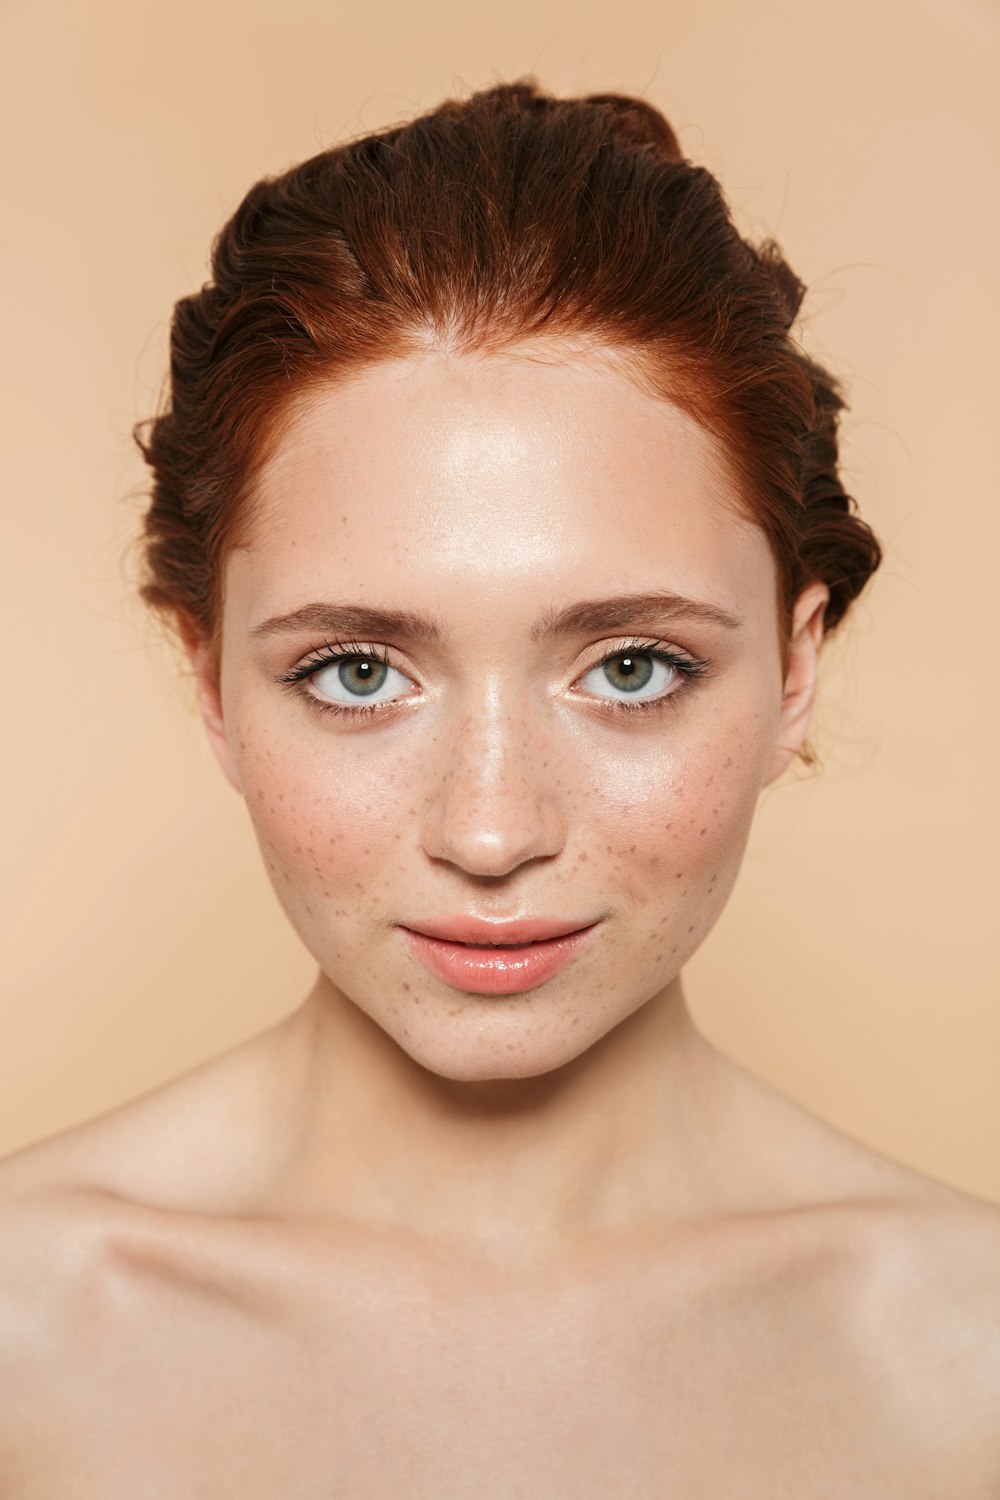 a woman with freckled hair and blue eyes